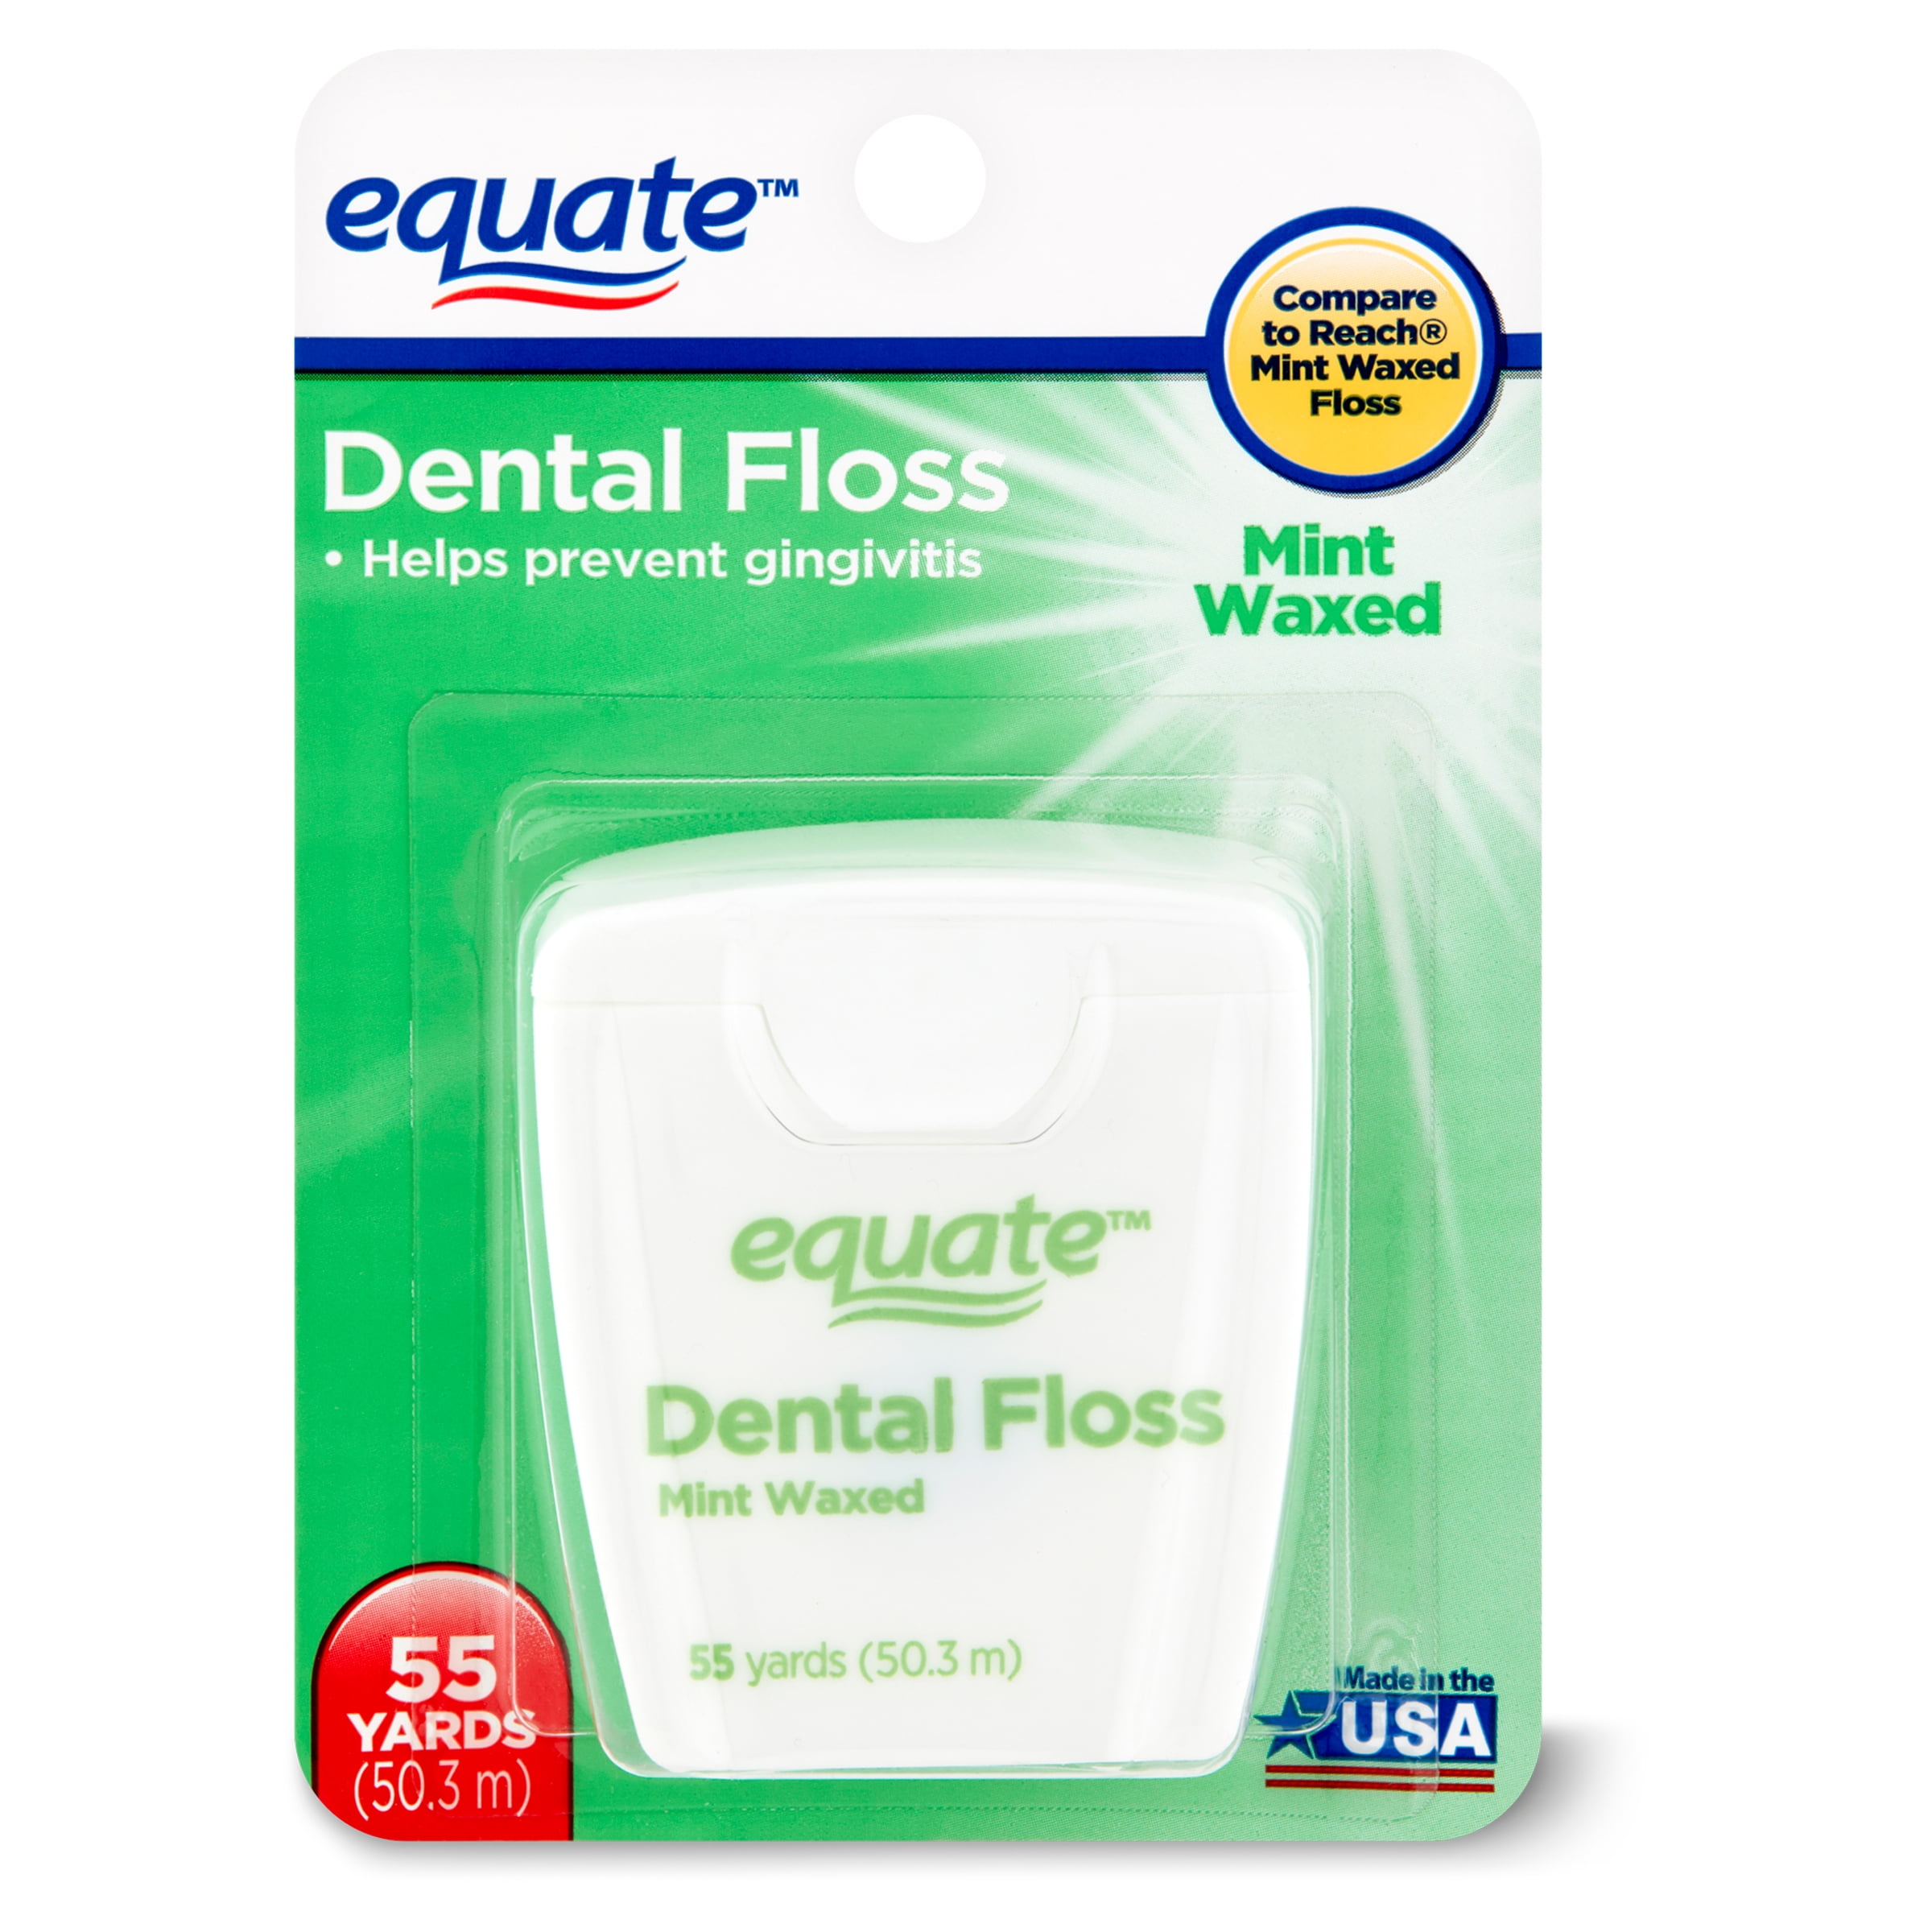 Equate Mint Waxed Dental Floss, Removes Plaque and Food Debris, Stimulates Gums, Gentle Cleaning, Nylon Floss, 55 yds